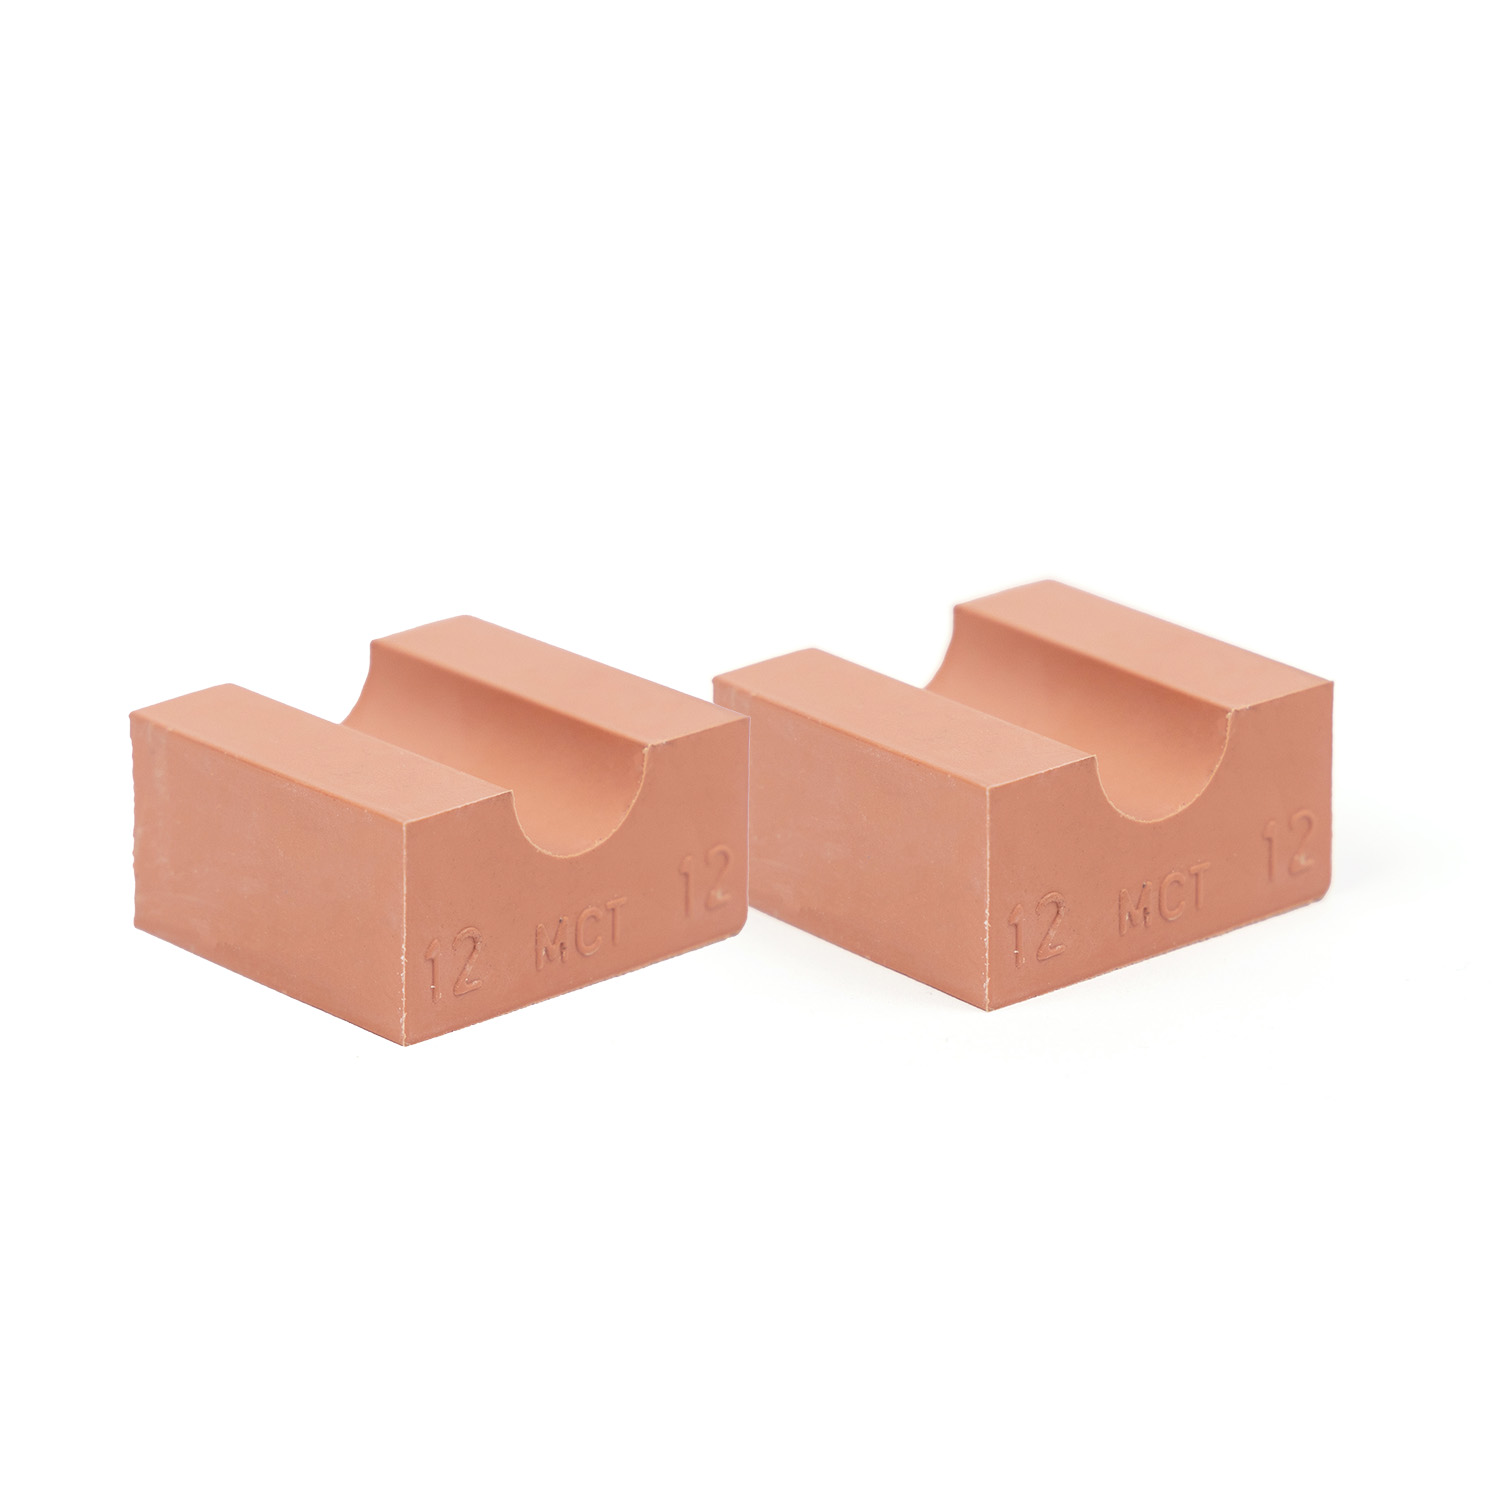 15-04 30MM*2 Set of 2 half insert block lycron 30mm, 15-04 for cable/pipe diam. 3.5-4.5mm